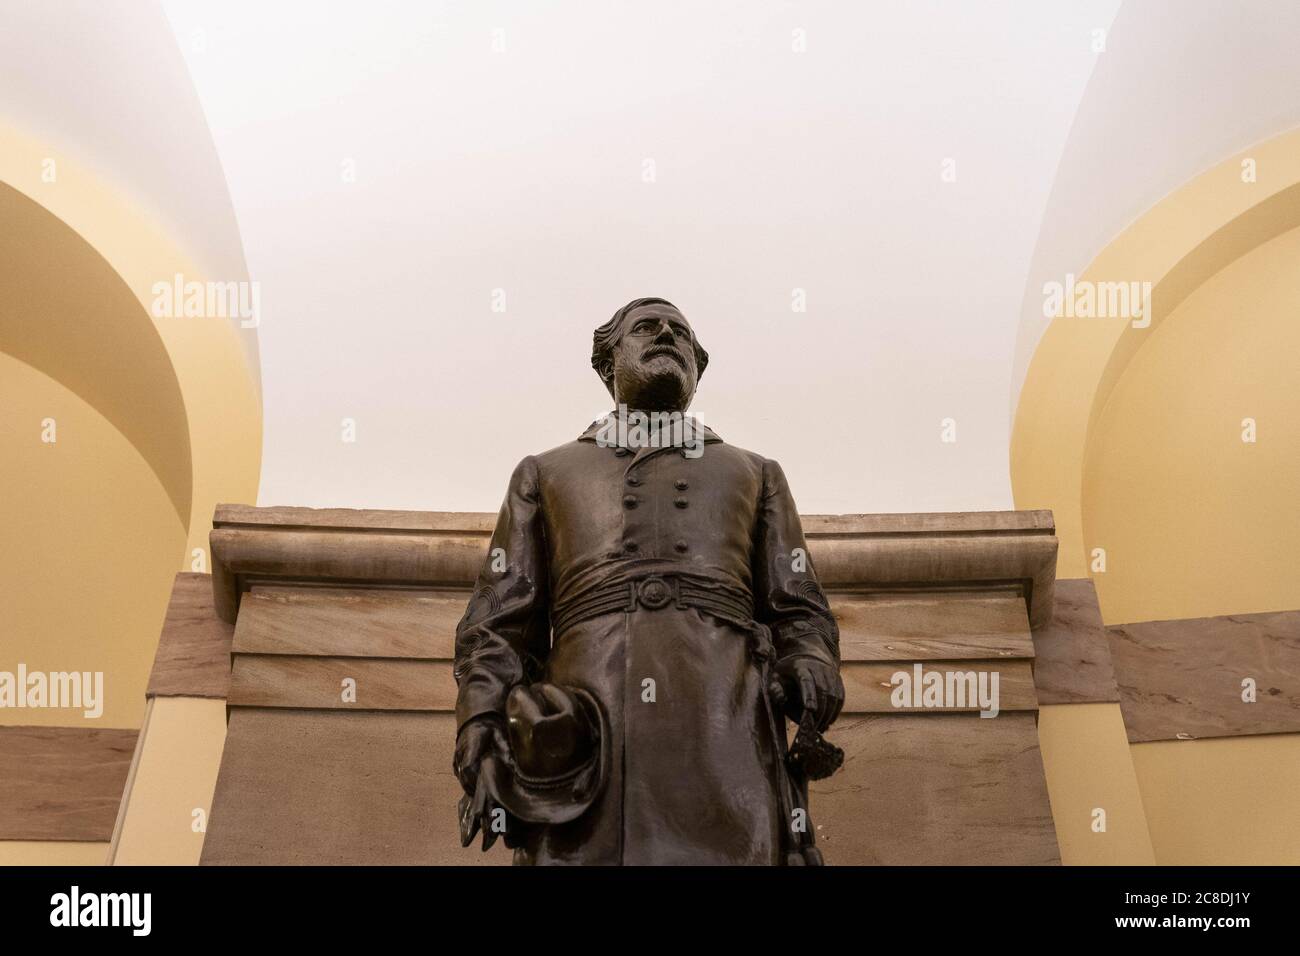 Washington, United States. 23rd July, 2020. A statue of Robert E. Lee, a leader of the Confederate Army of Northern Virginia, stands in the U.S. Capitol in Washington, DC, U.S., on Thursday, July 23, 2020. The House of Representatives voted on Wednesday to remove Confederate statues from the U.S. Capitol as part of an effort to remove symbols of racism. Photo by Sarah Silbiger/UPI Credit: UPI/Alamy Live News Stock Photo